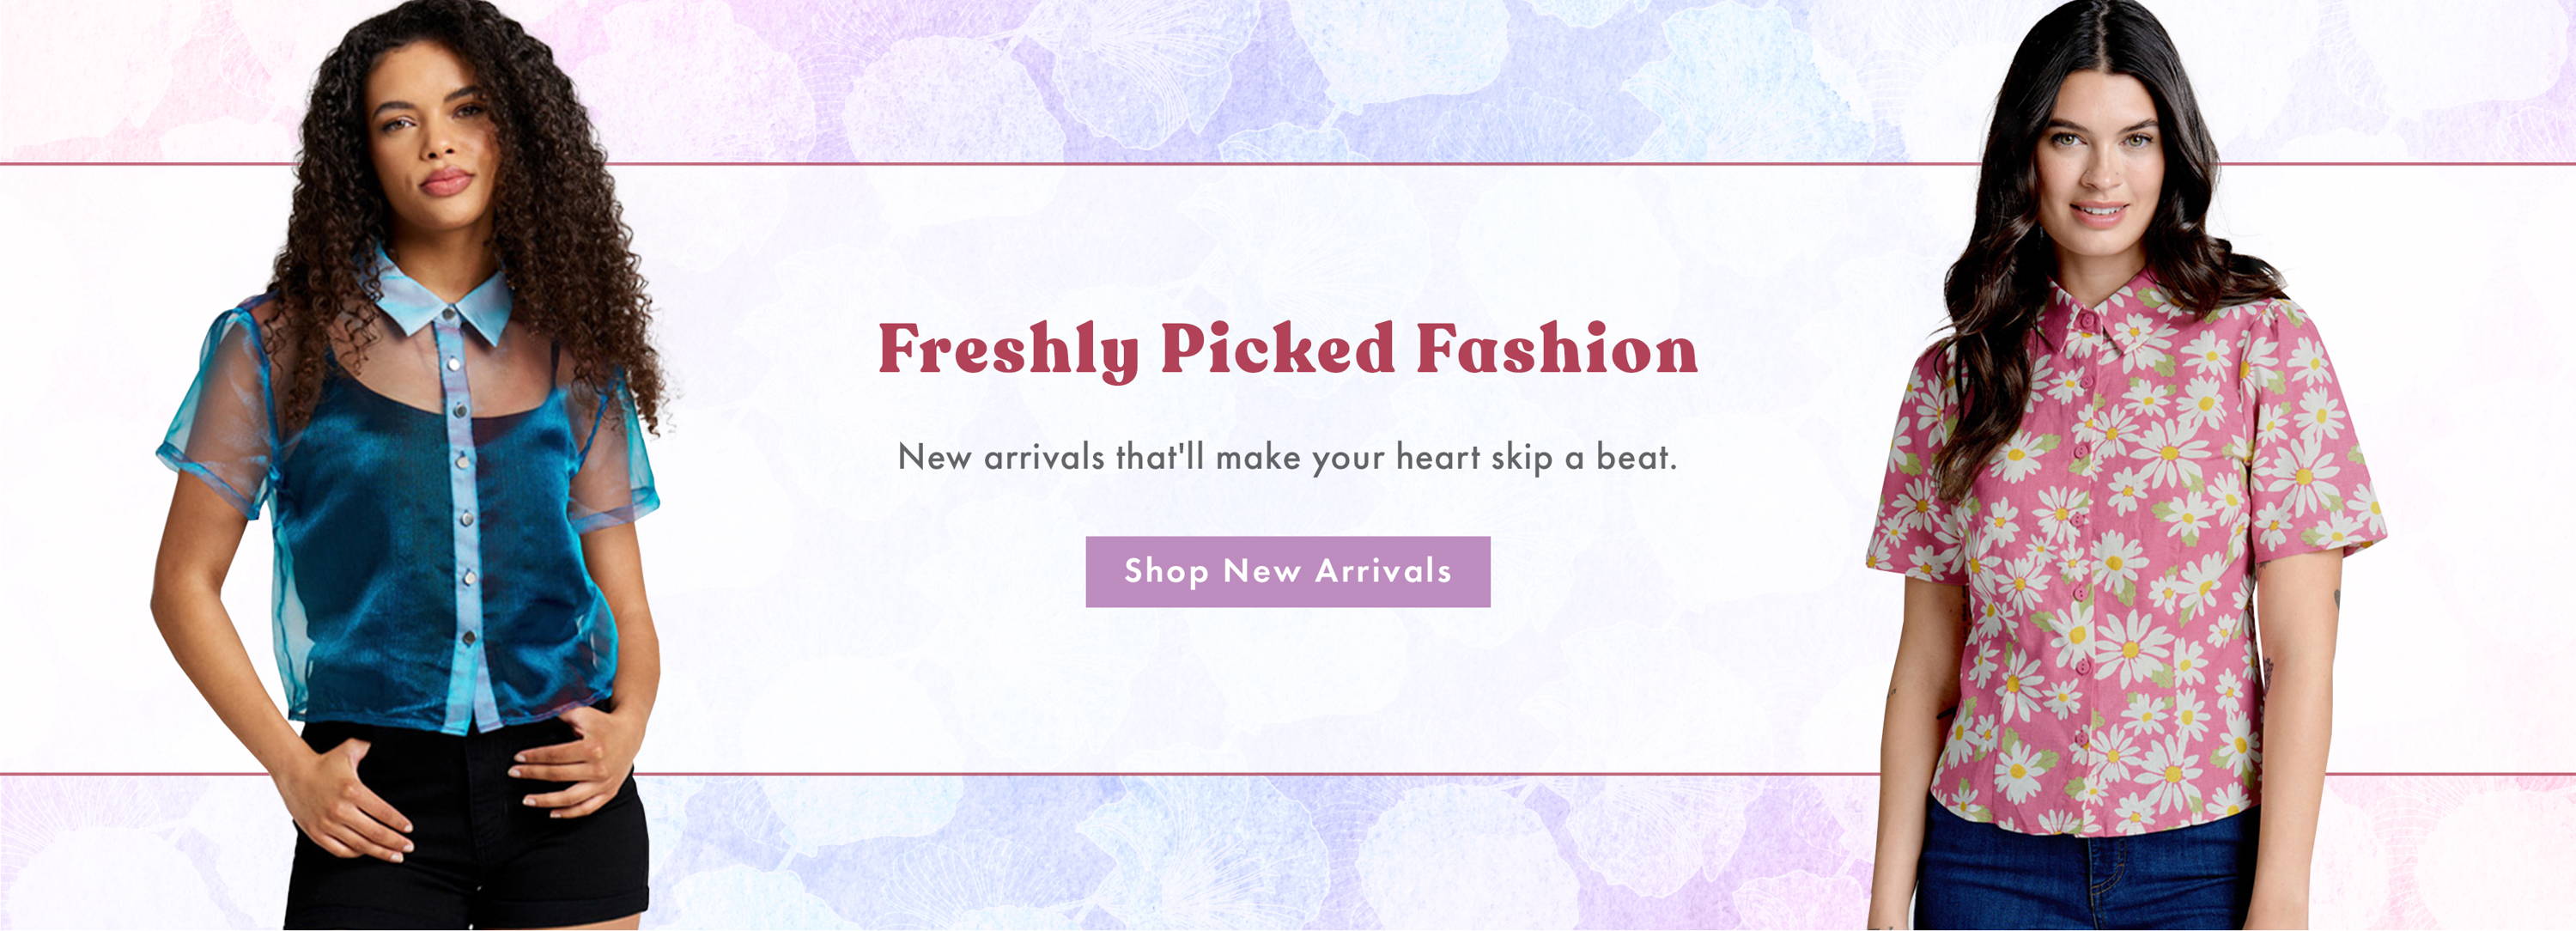 Freshly Picked Fashion: New arrivals that'll make your heart skip a beat. SHOP NEW ARRIVALS